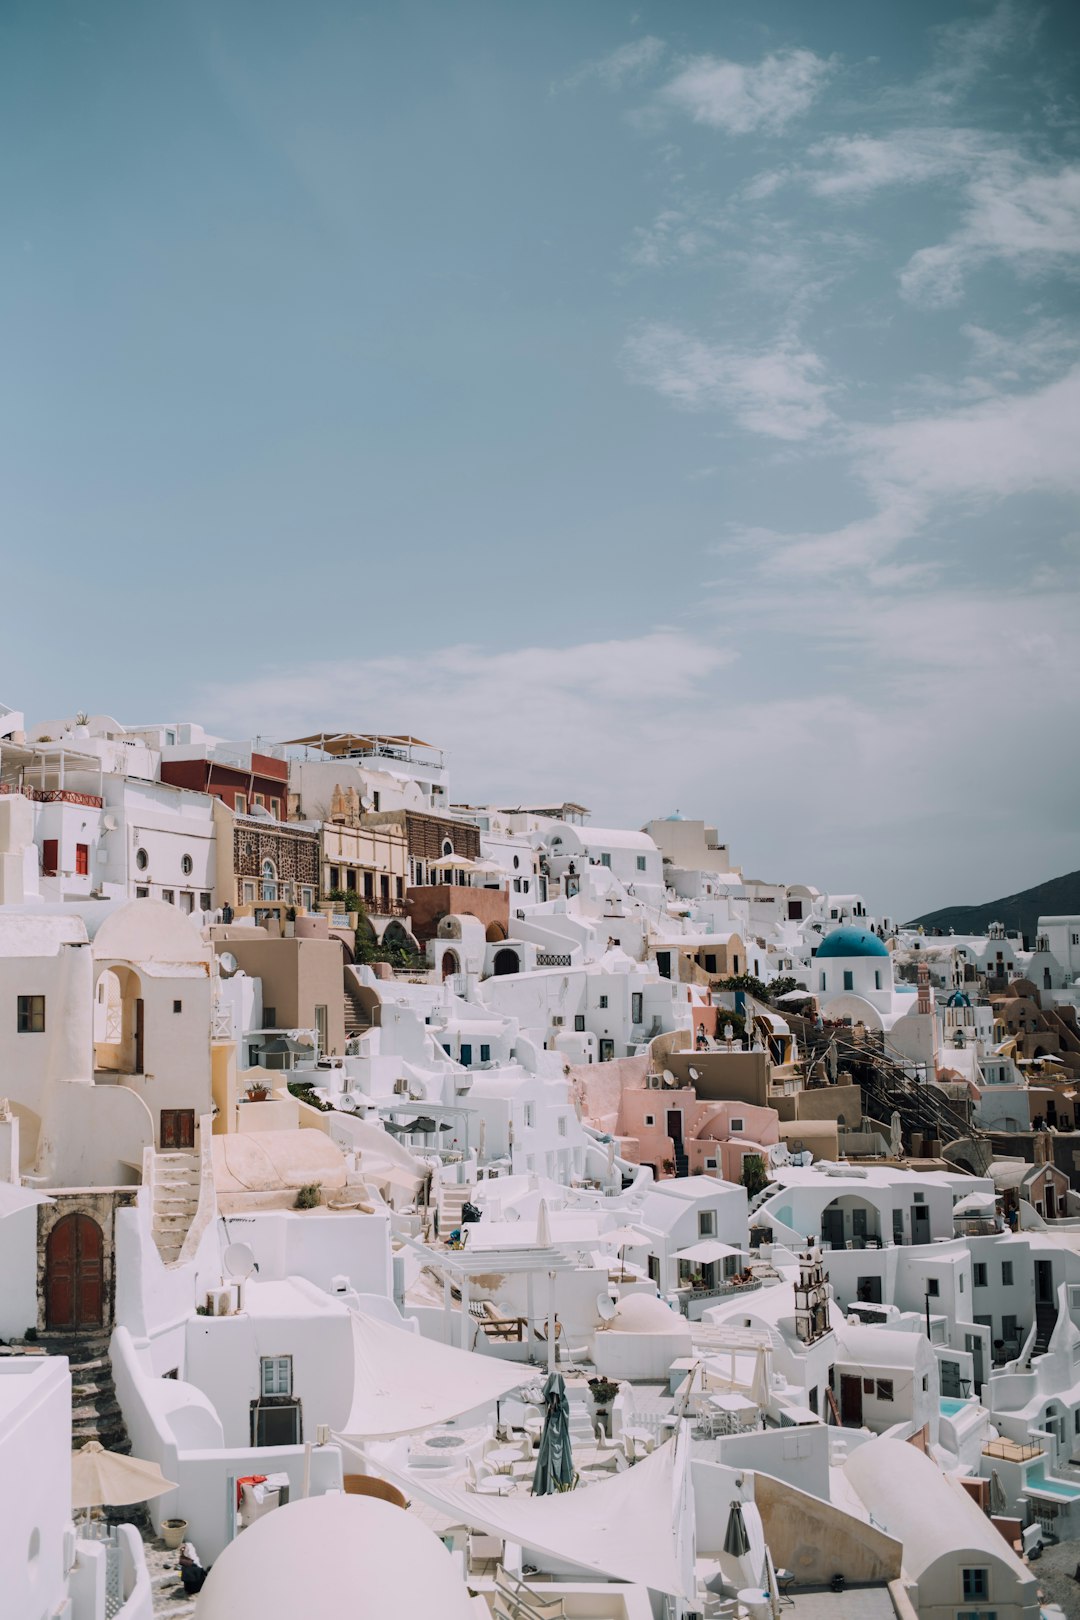 Travel Tips and Stories of Oia in Greece